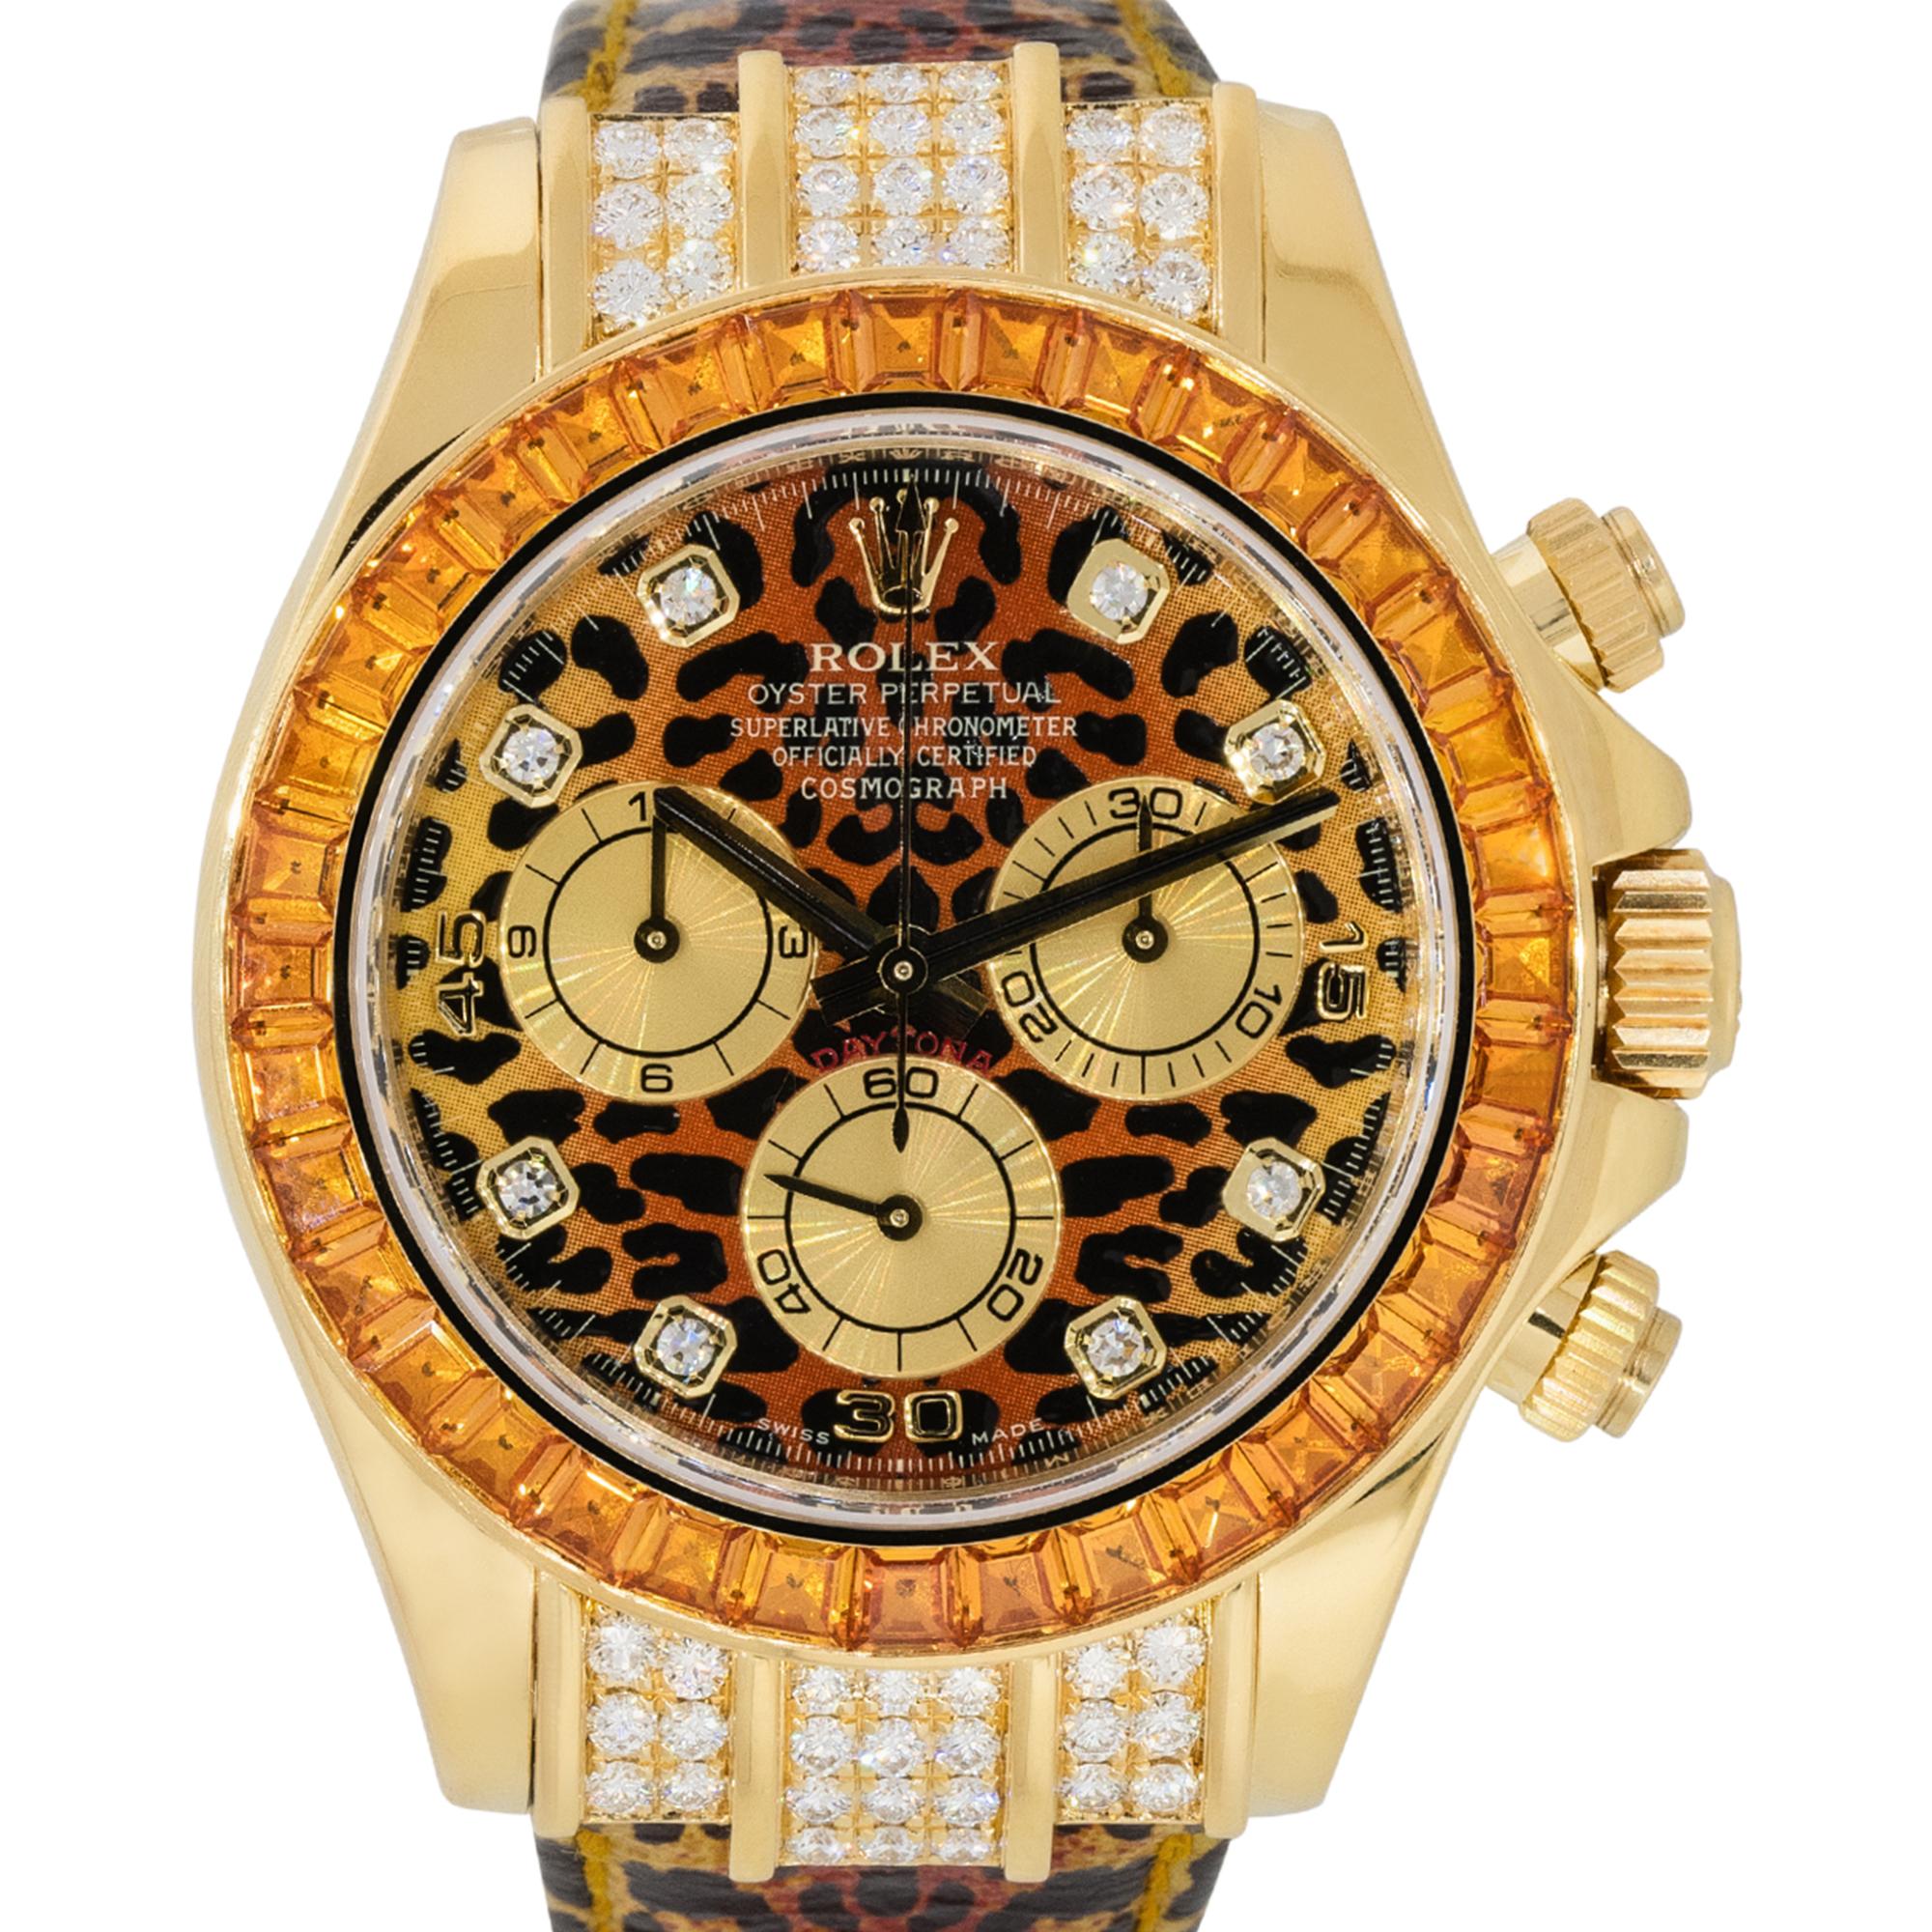 Brand: Rolex
MPN: 116598
Model: Daytona
Case Material: 18k Yellow gold with Diamonds
Case Diameter: 40mm
Crystal: Scratch resistant sapphire
Bezel: 18k yellow gold bezel with Orange sapphire gemstones
Dial: Leopard themed dial with yellow hold hands